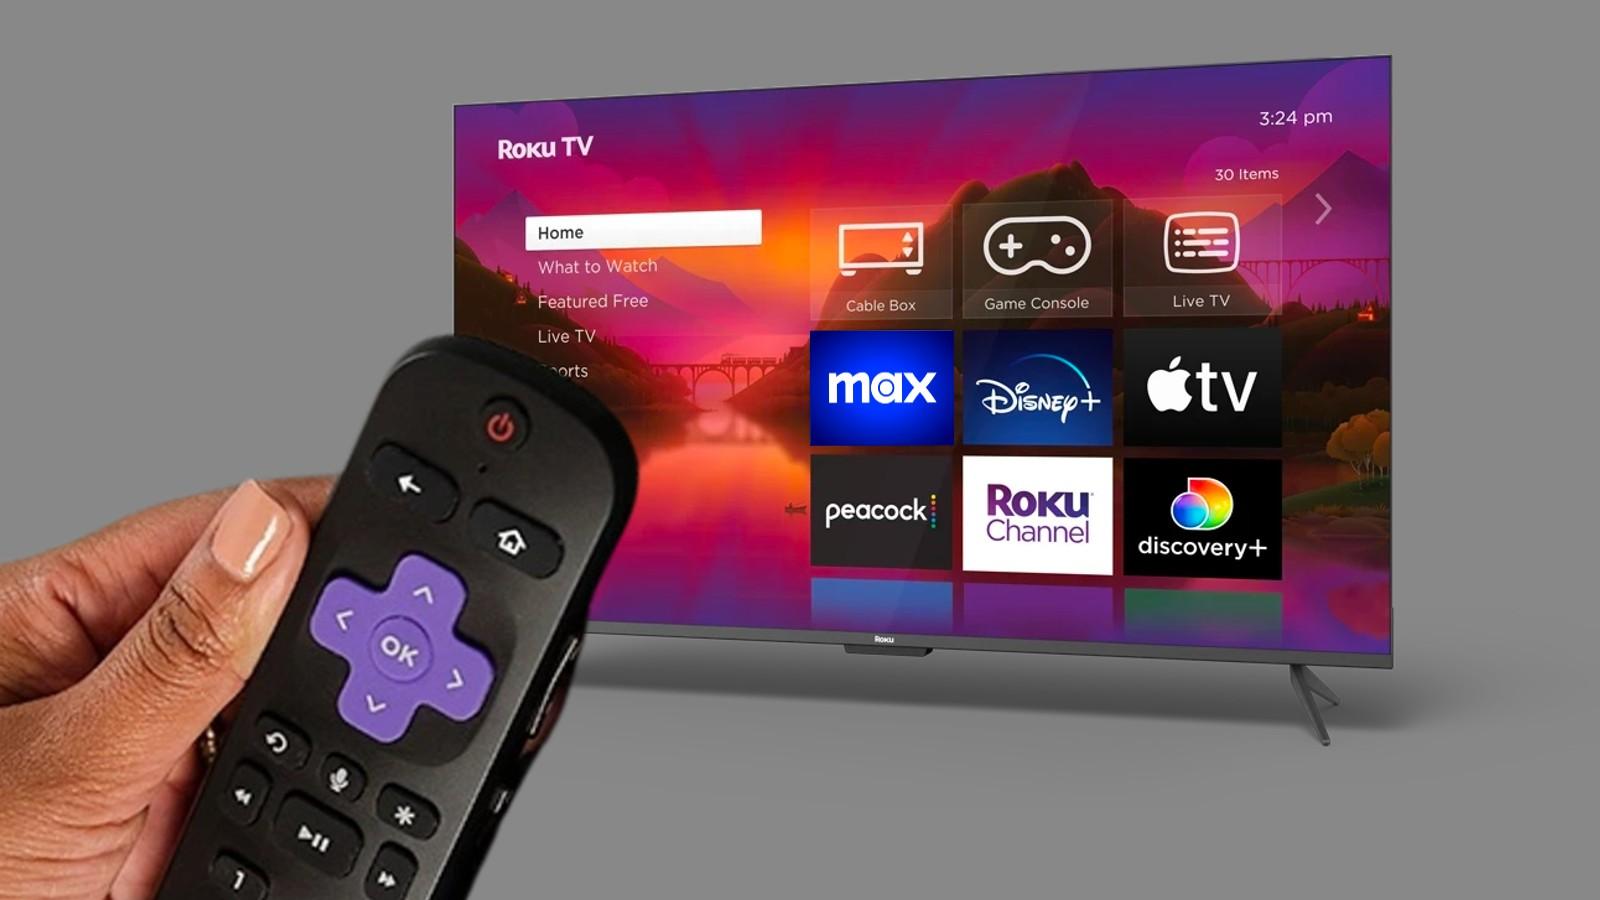 A Roku remote and the Max app on the Roku channel dashboard after the HBO Max update